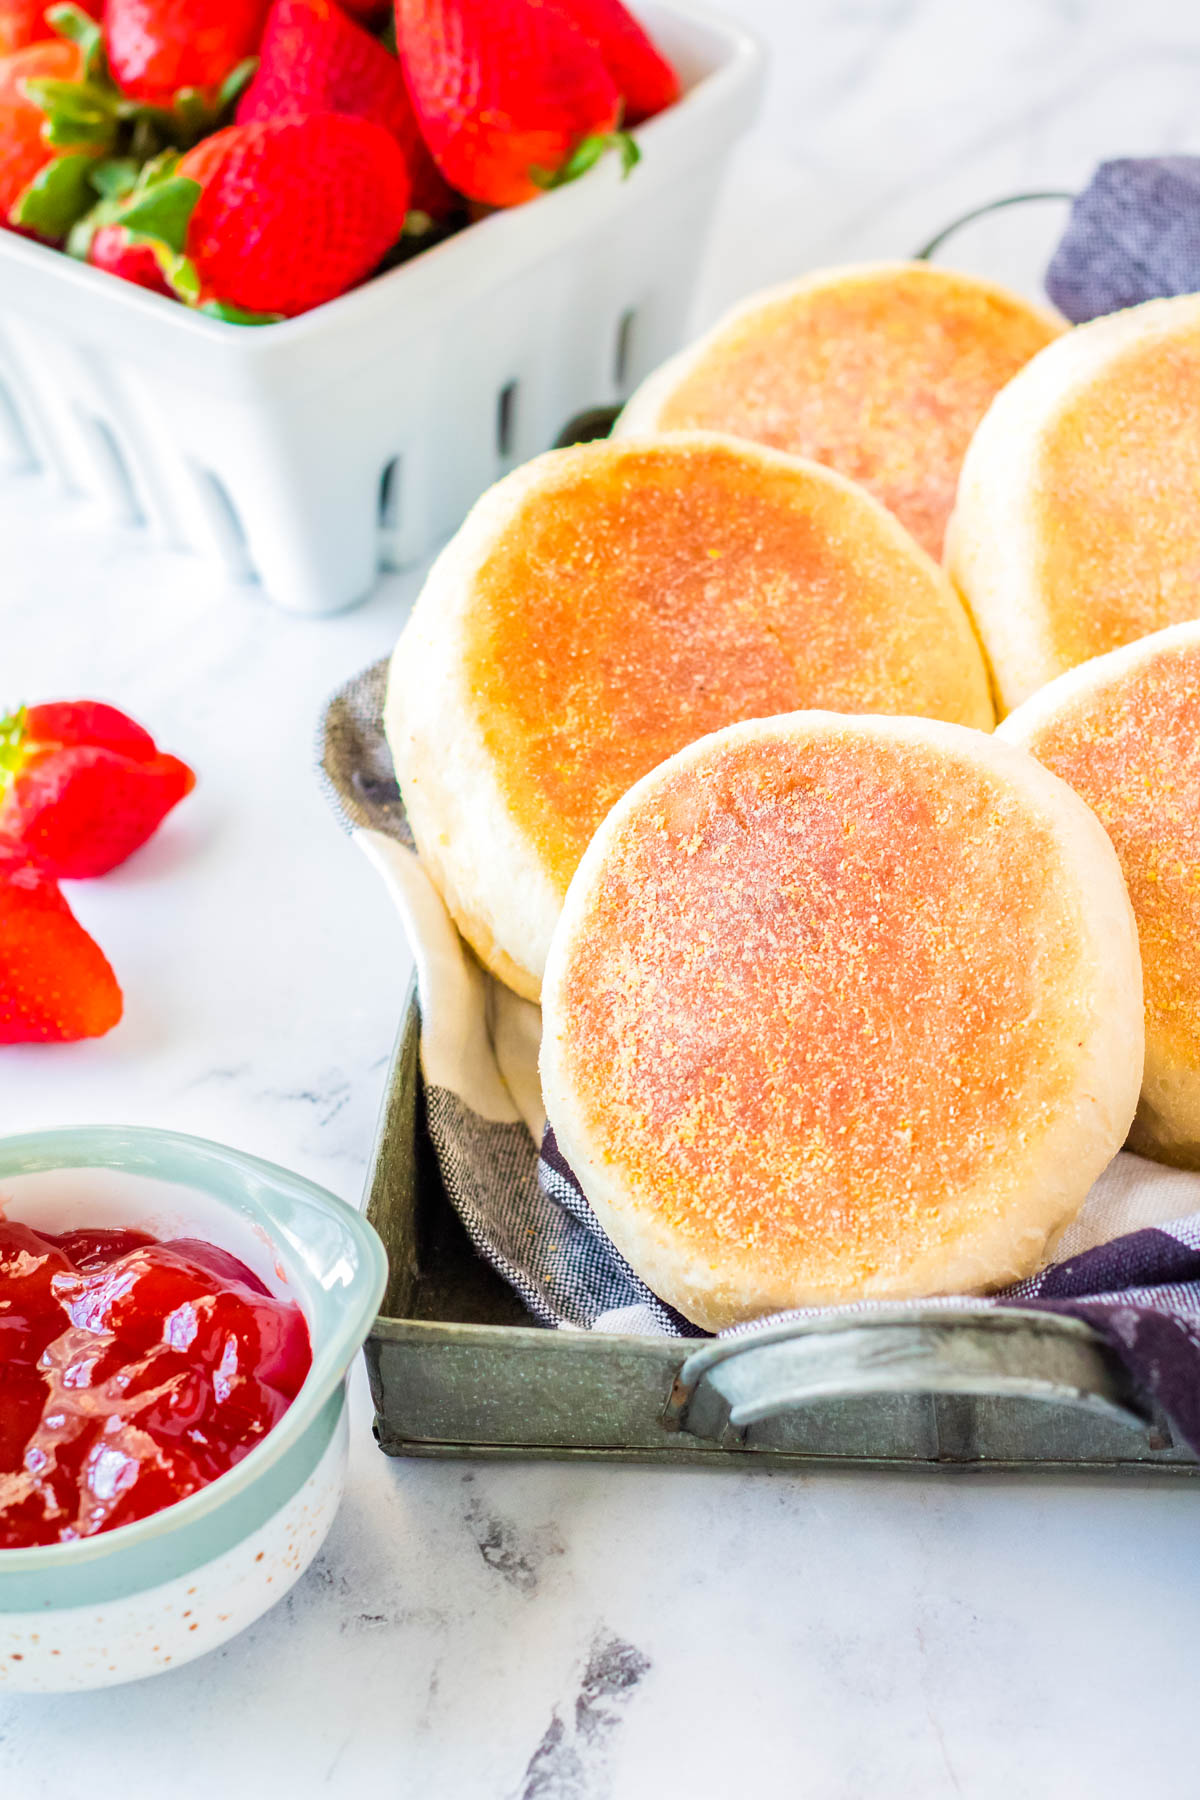 A close up picture of a basket of Homemade English Muffins.